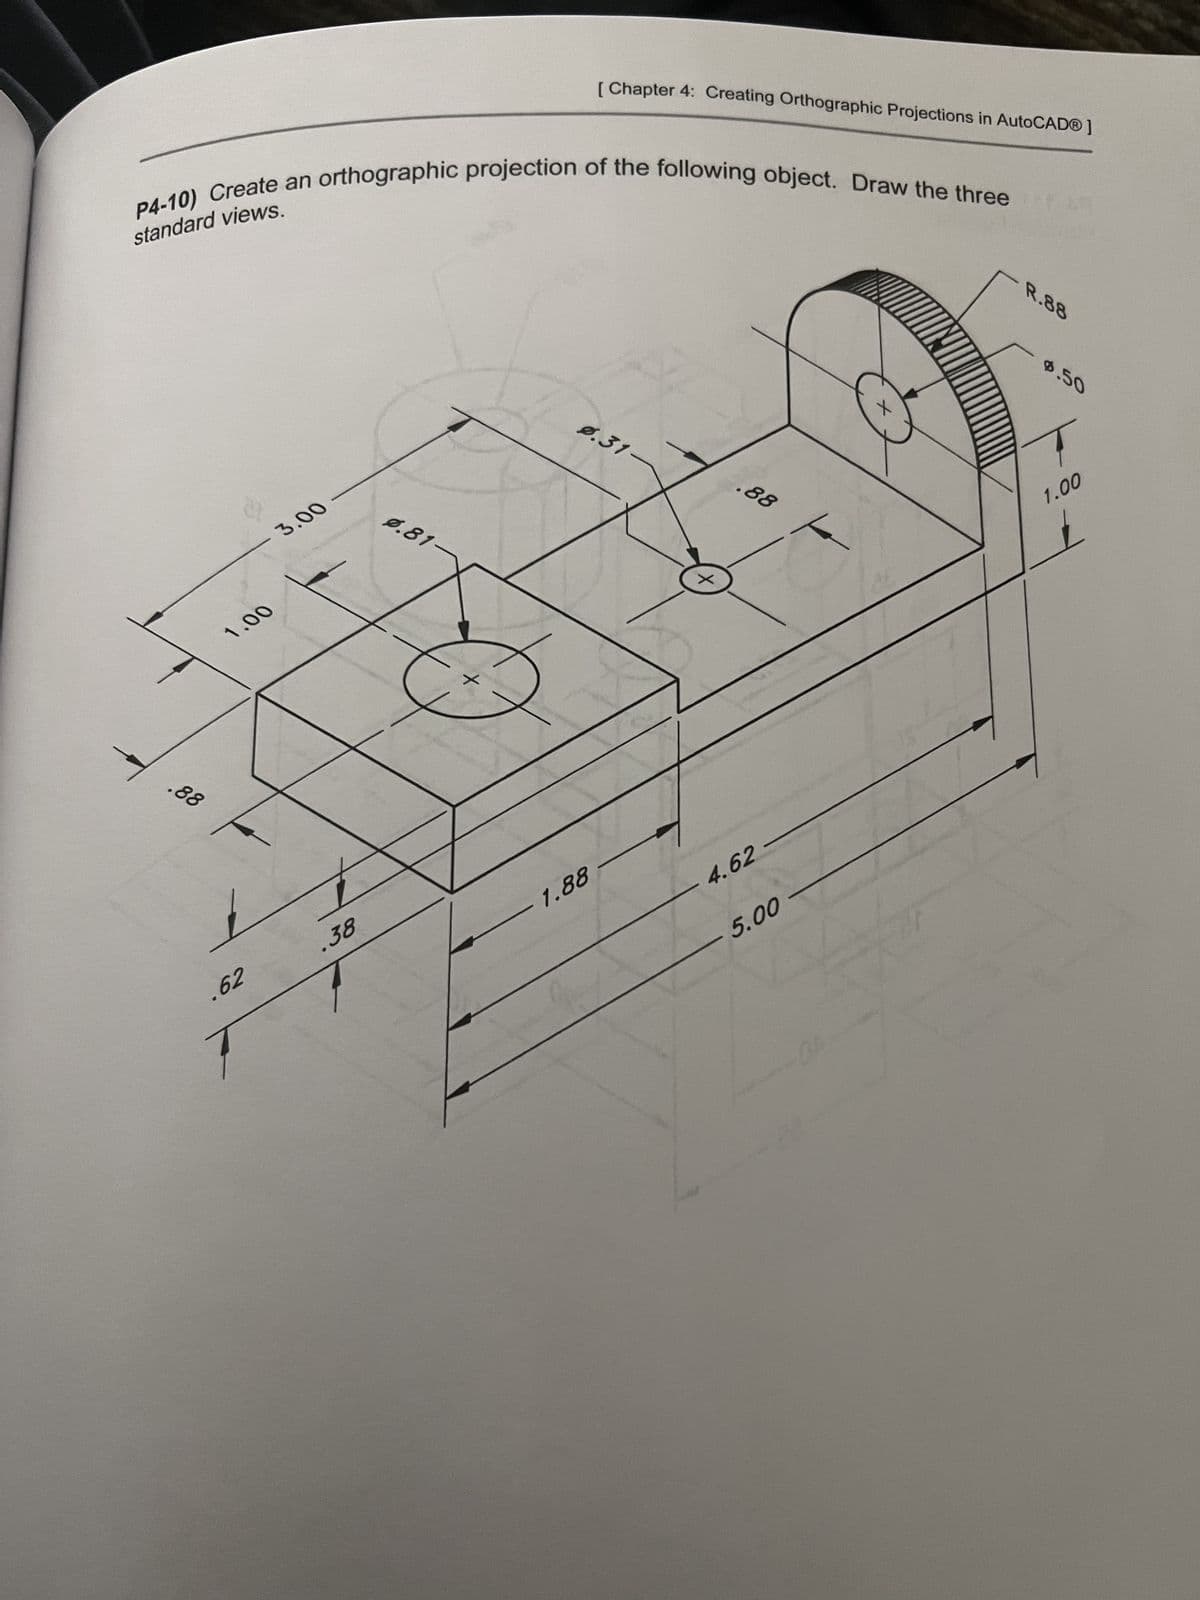 standard views.
P4-10) Create an orthographic projection of the following object. Draw the three
.88
3.00
1.00
.62
.38
0.81-
[ Chapter 4: Creating Orthographic Projections in AutoCAD®]
0.31-
1.88
.88
4.62
5.00
R.88
0.50
1.00